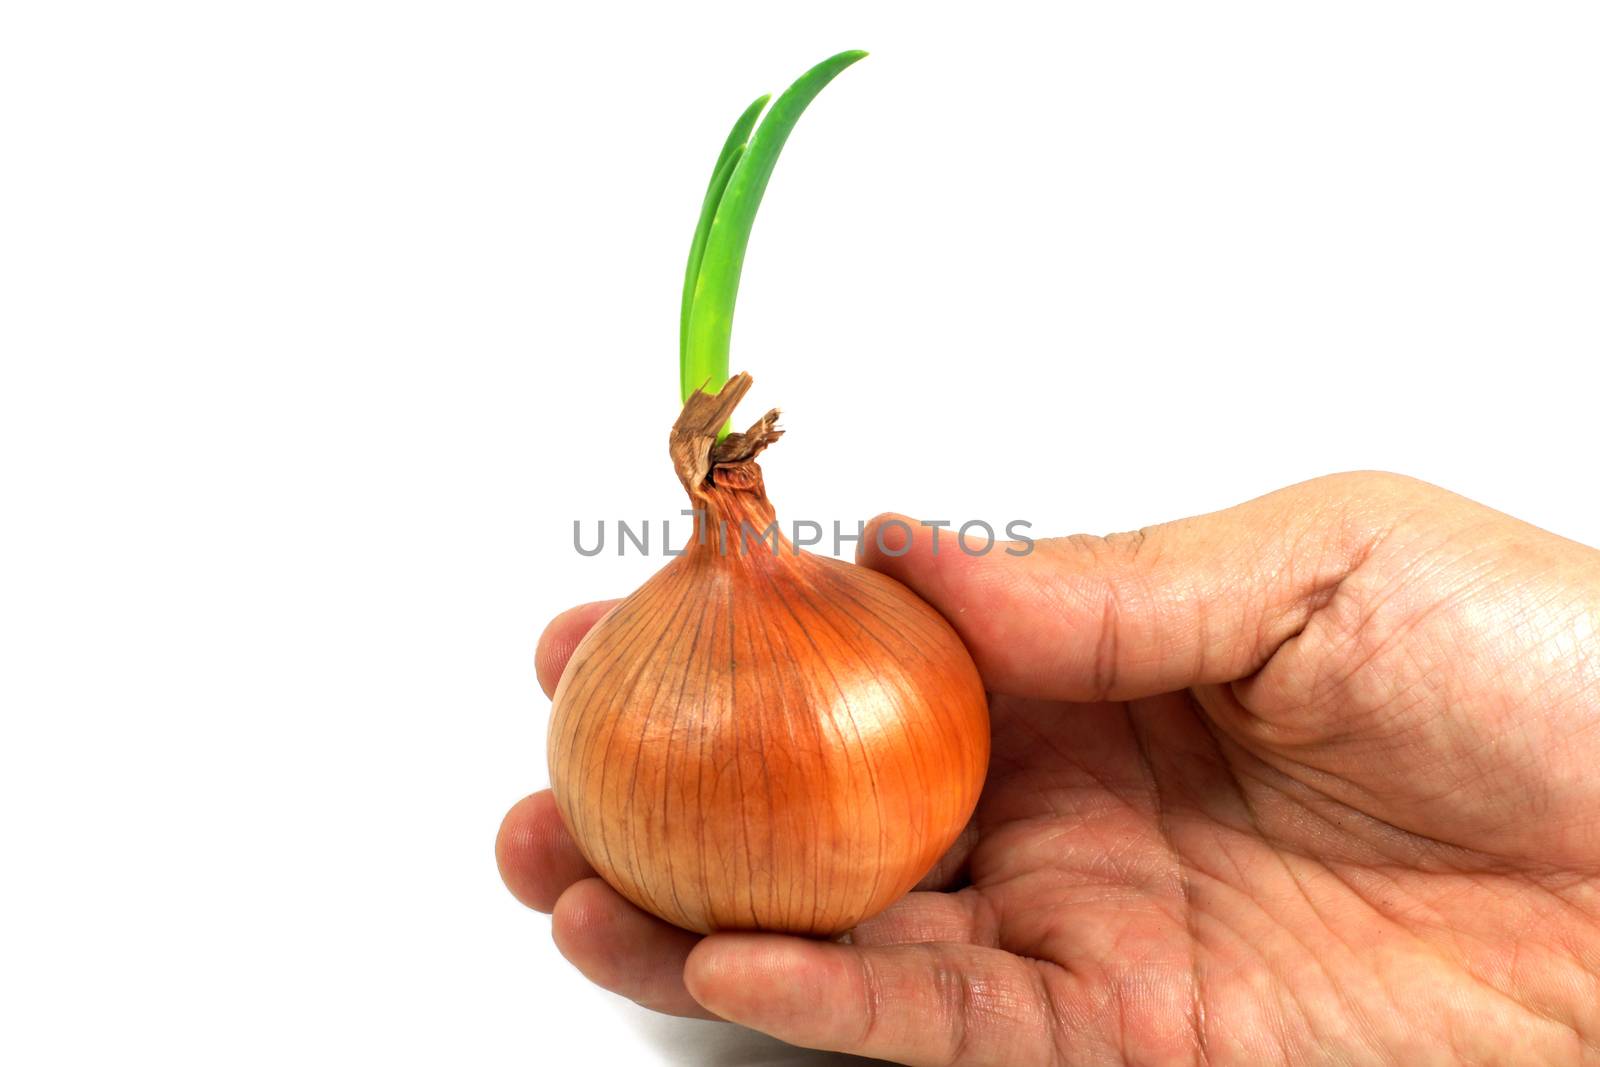 Growing Onion on right hand by mranucha